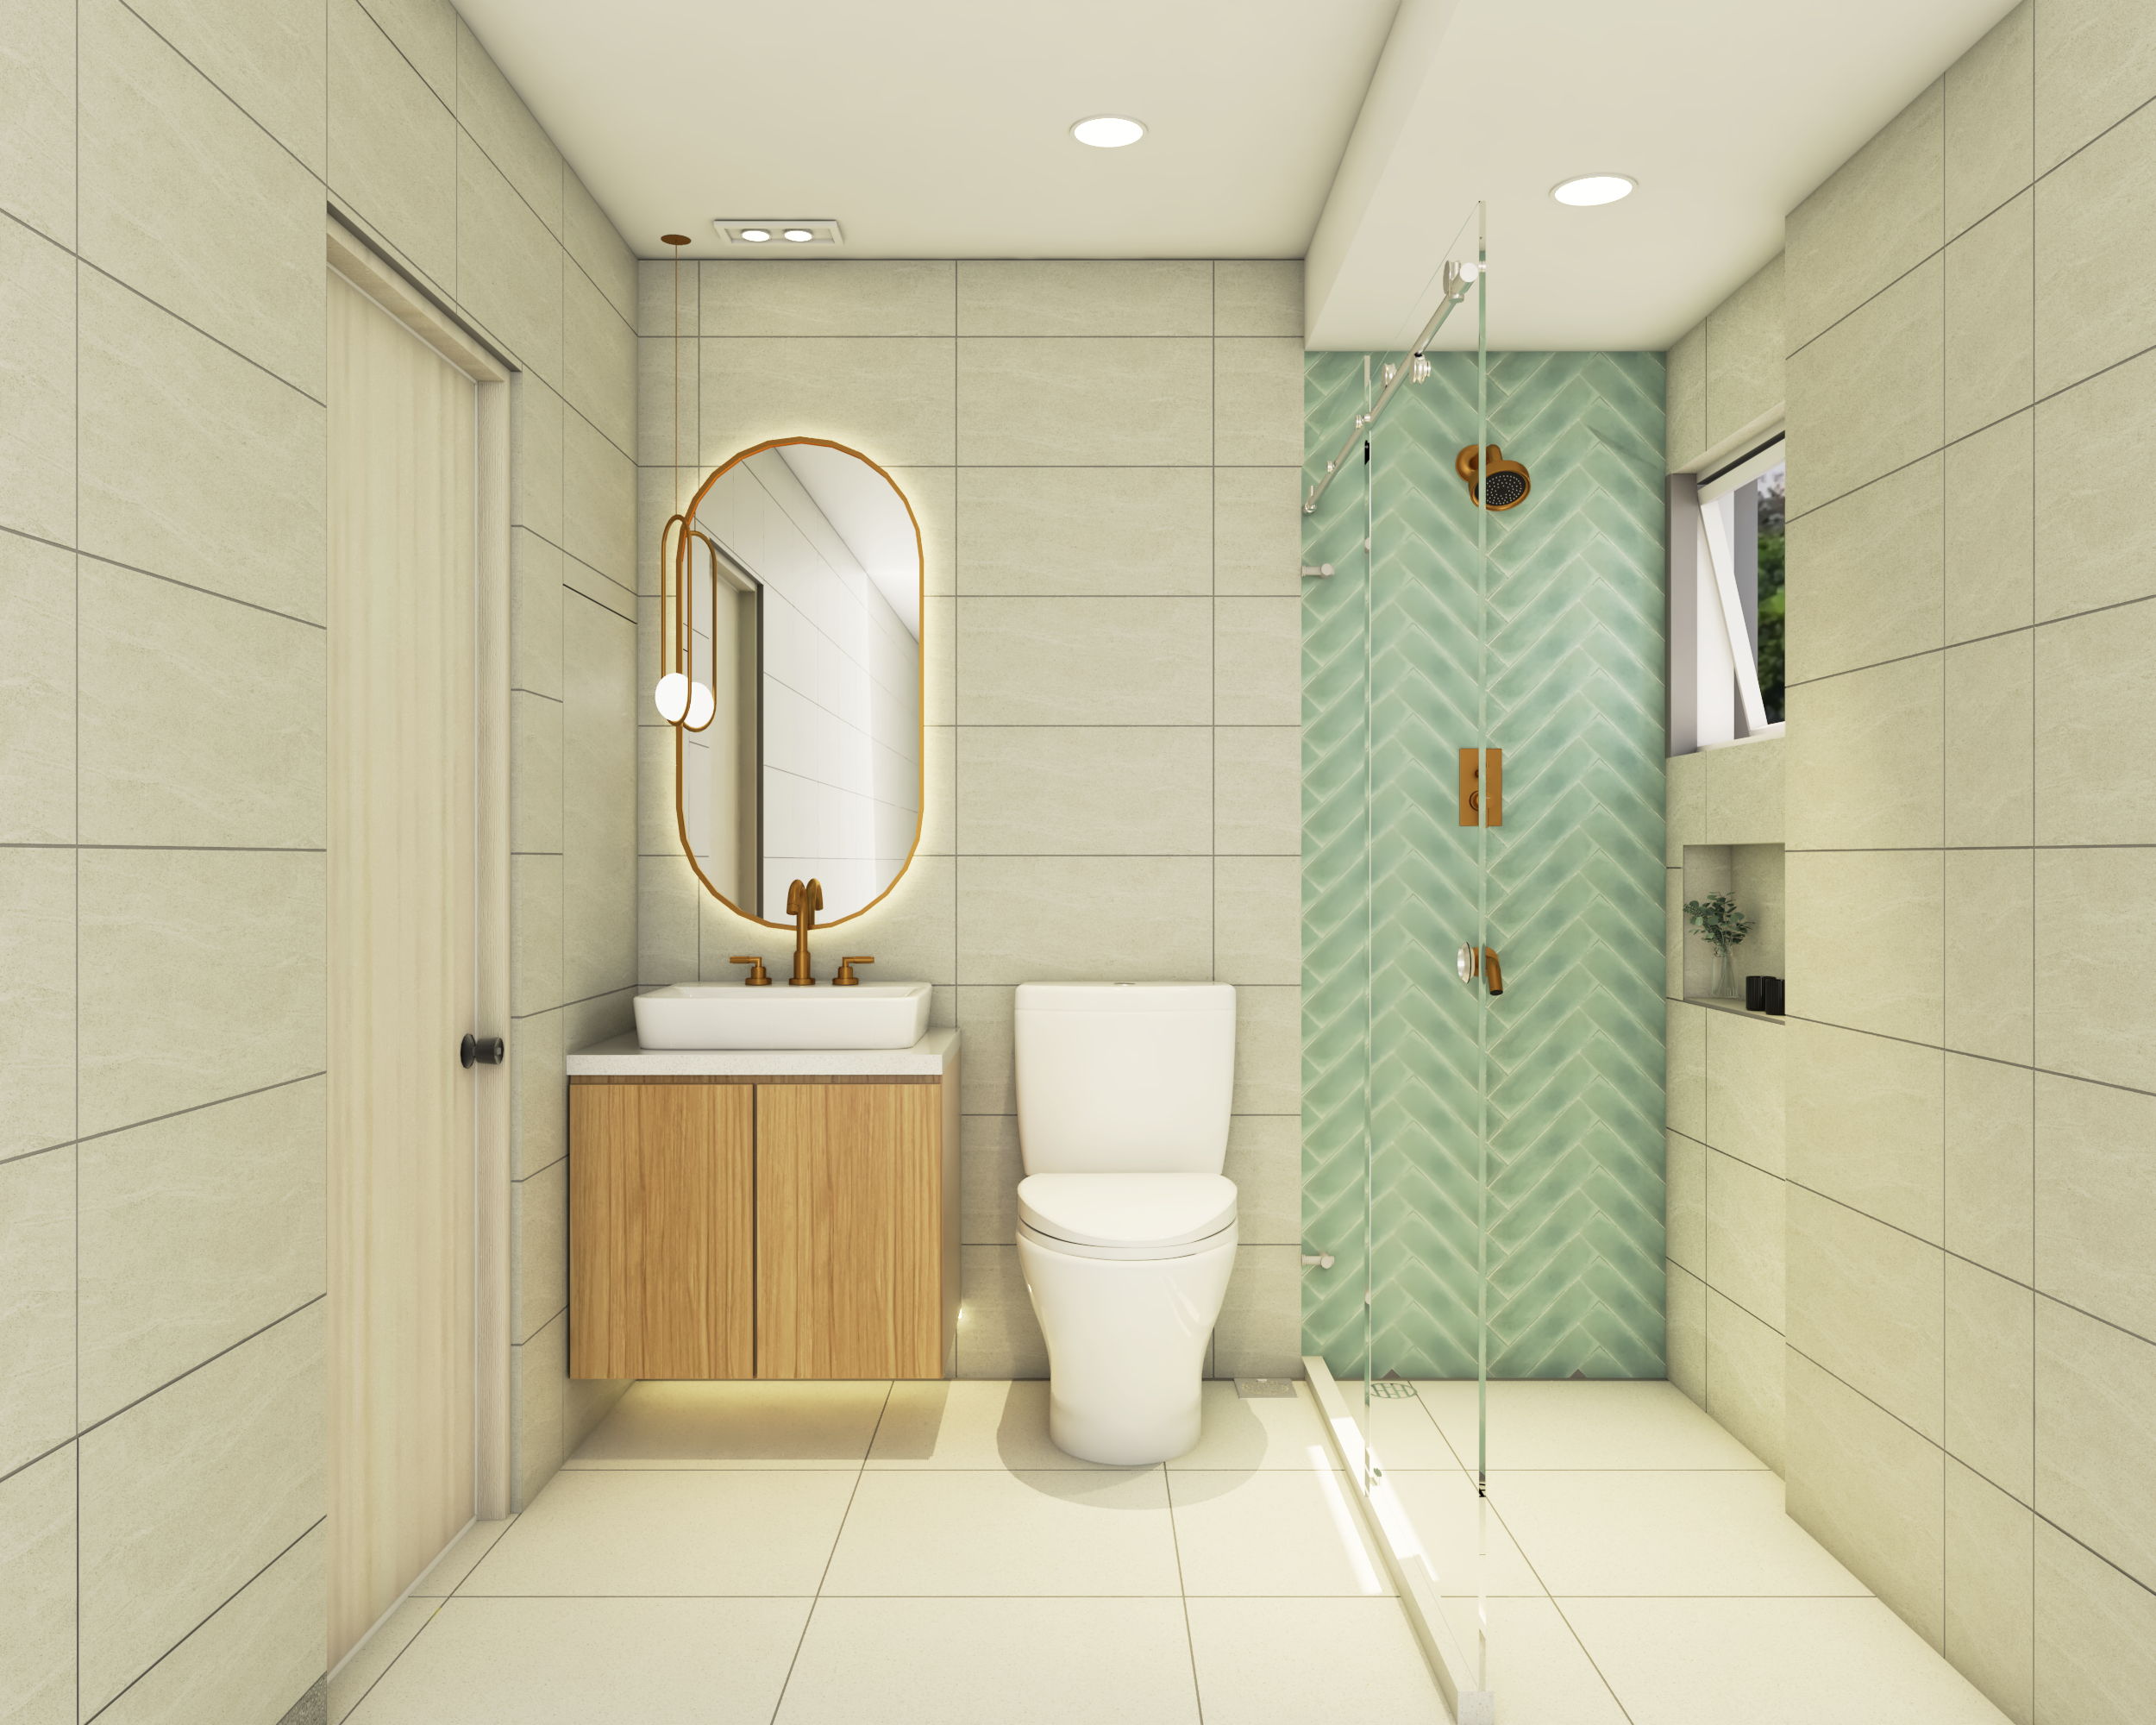 Modern Toilet Design With Mint Green Tiles